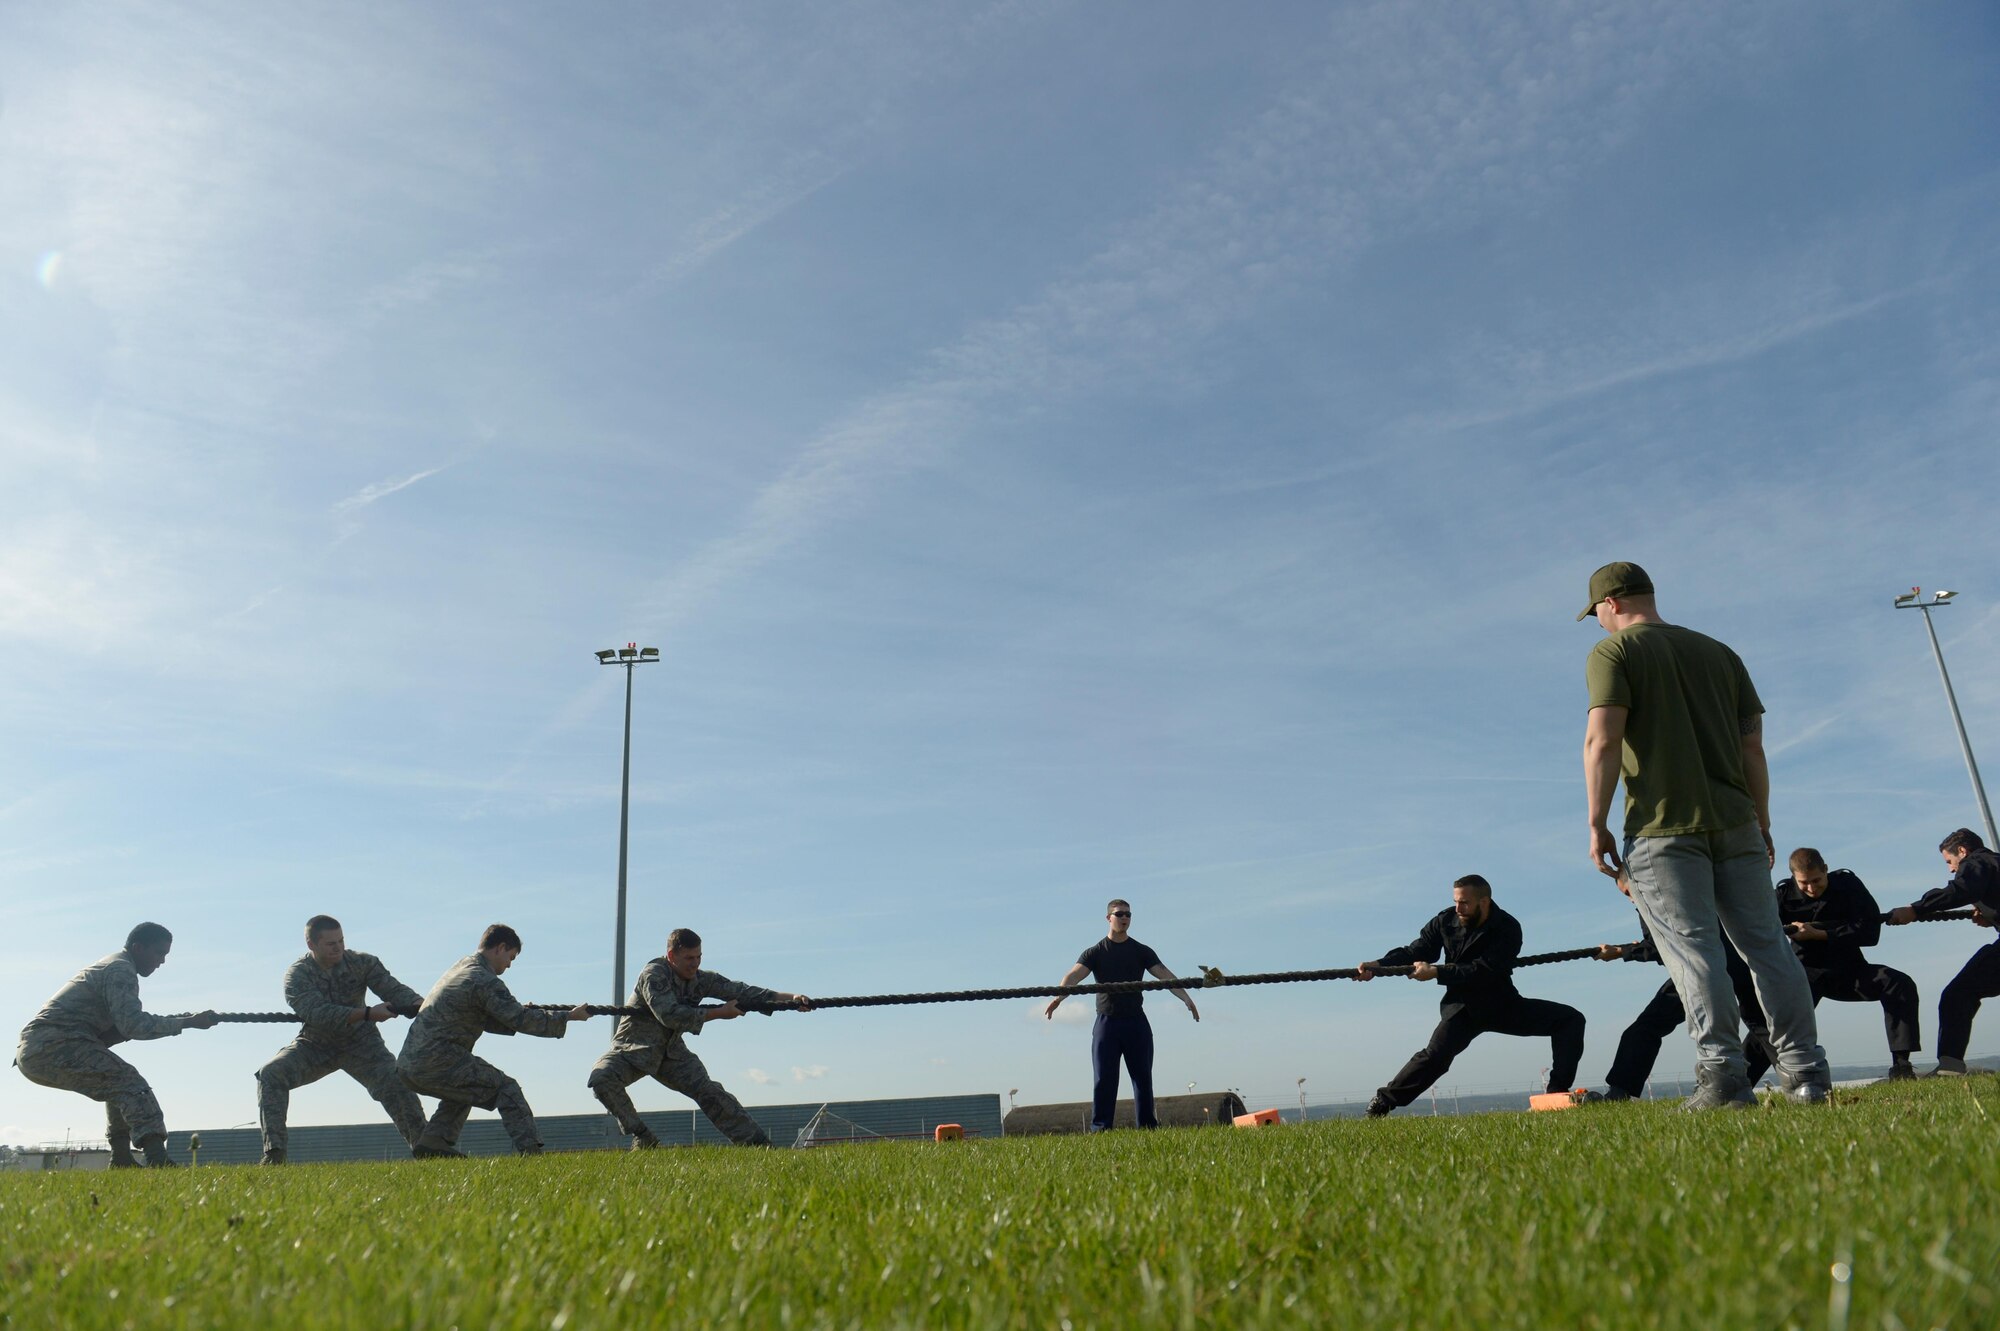 Airmen assigned to the 52nd Security Forces Squadron, left, compete against Luxembourg SWAT members in tug-of-war event during the Battle of the Badges at Spangdahlem Air Base, Germany, May 15, 2017. The event was part of National Police Week to recognize the service and sacrifice of law enforcement officers. (U.S. Air Force photo by Staff Sgt. Jonathan Snyder)